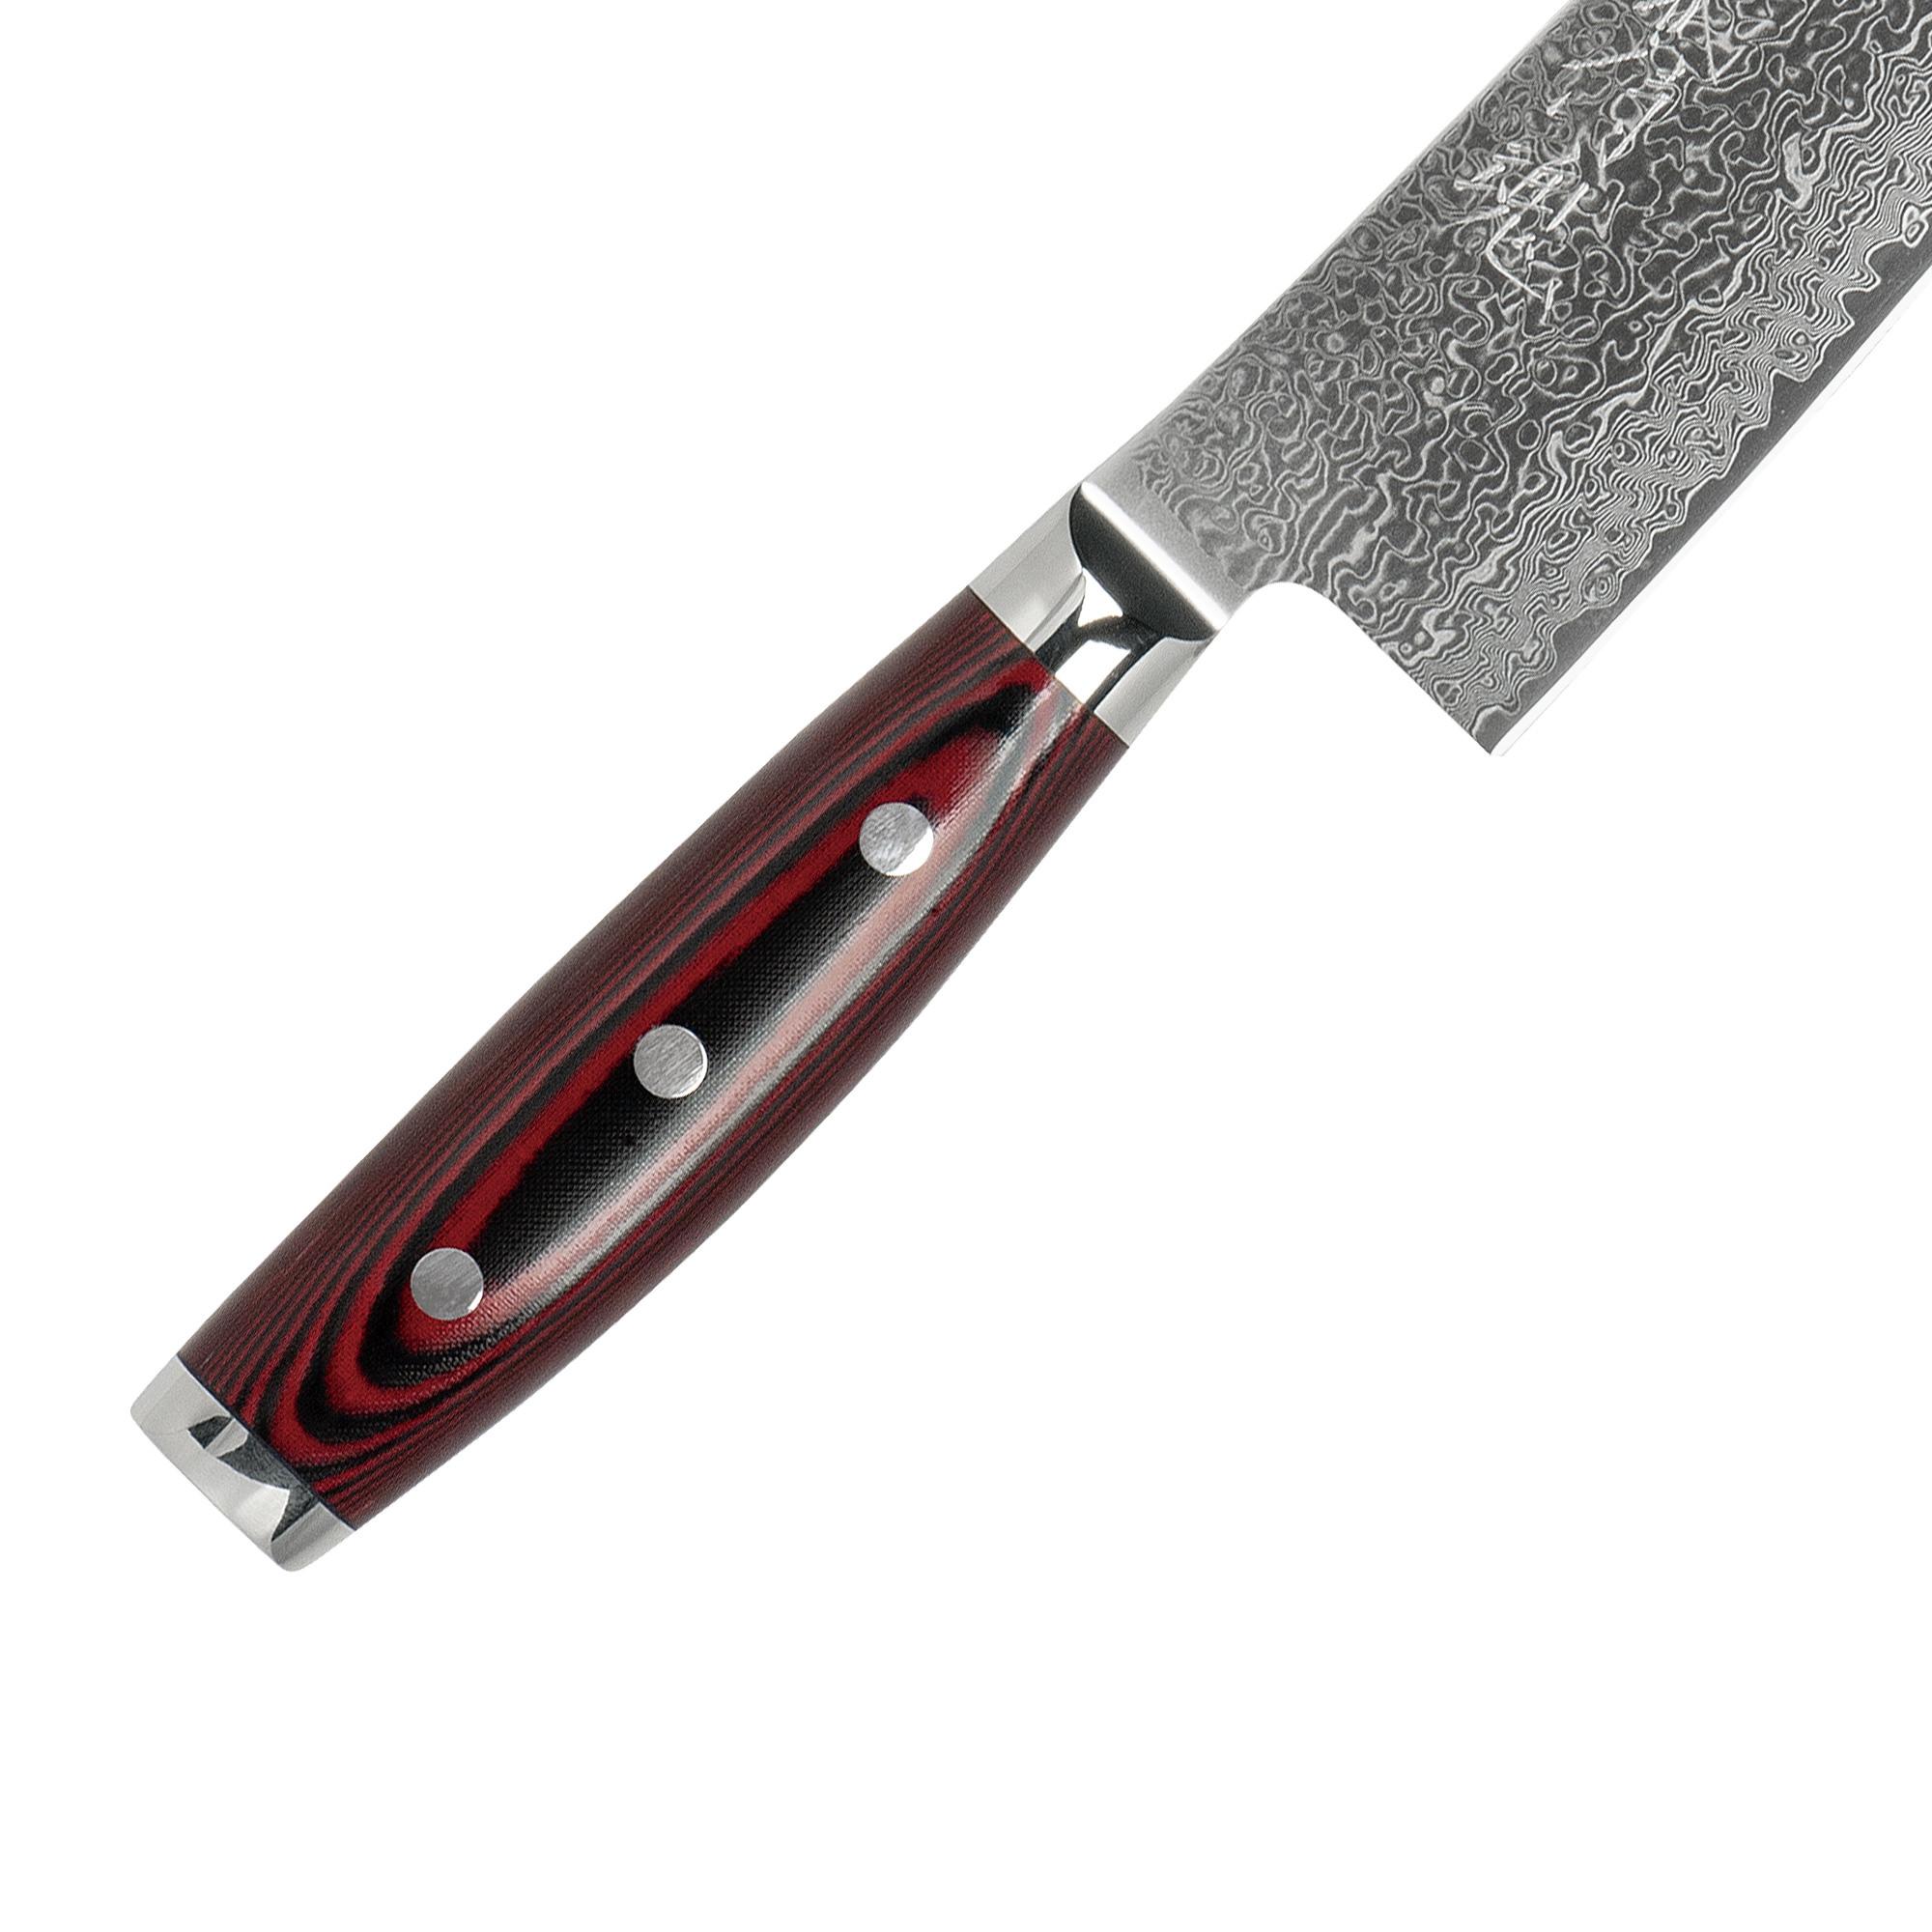 Yaxell Super Gou Chef's Knife 20cm Image 3